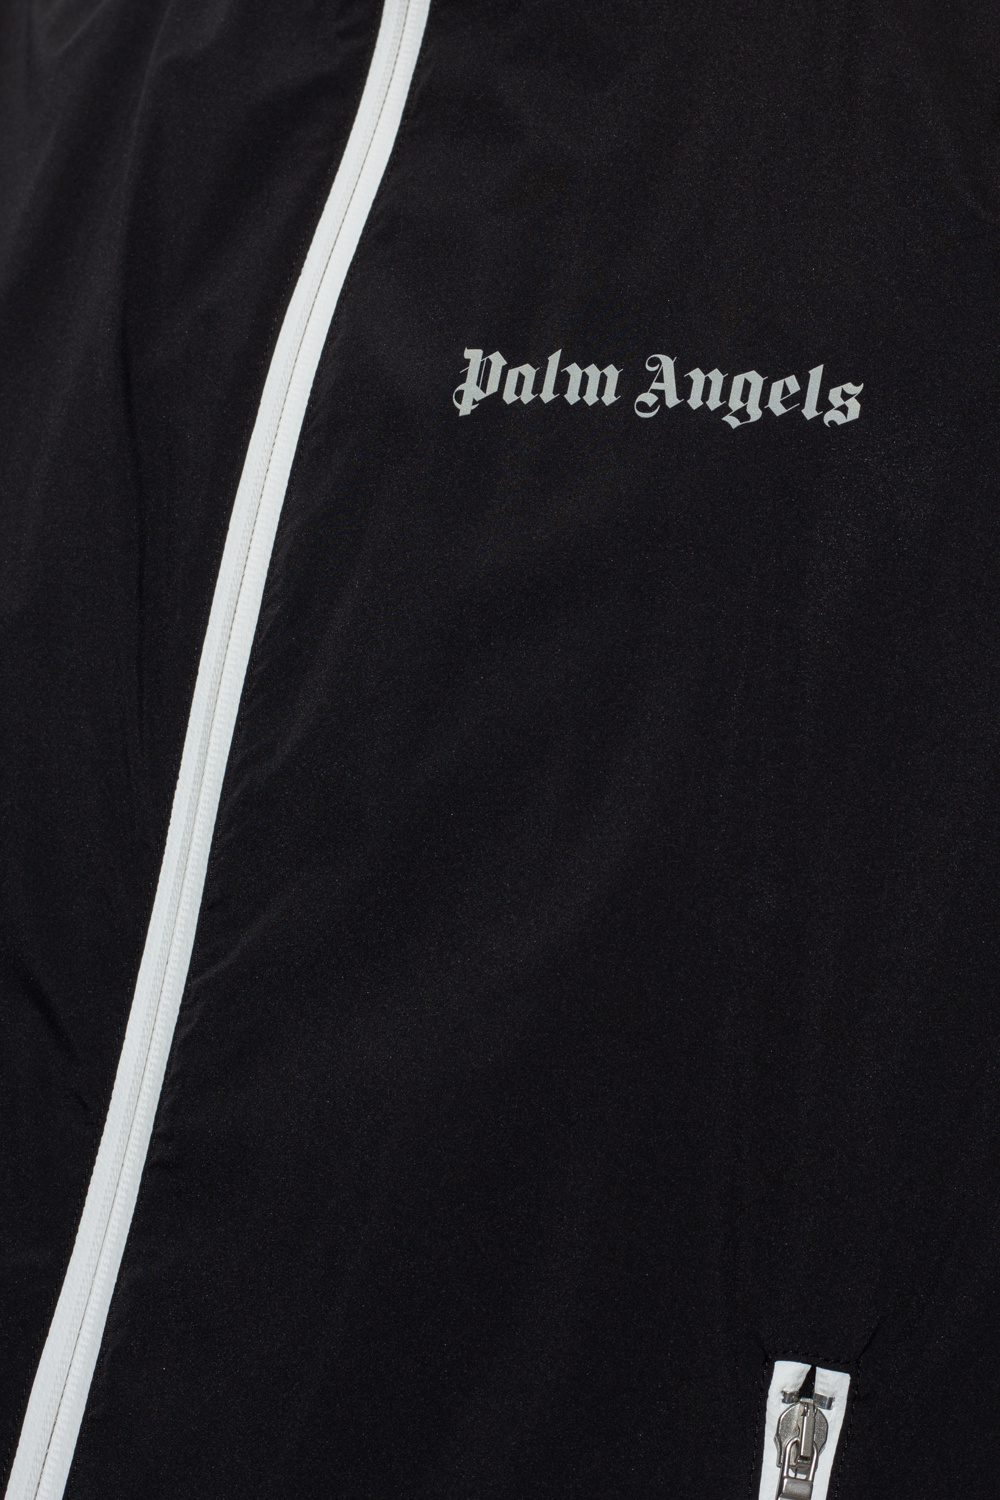 Palm Angels Track vest with logo